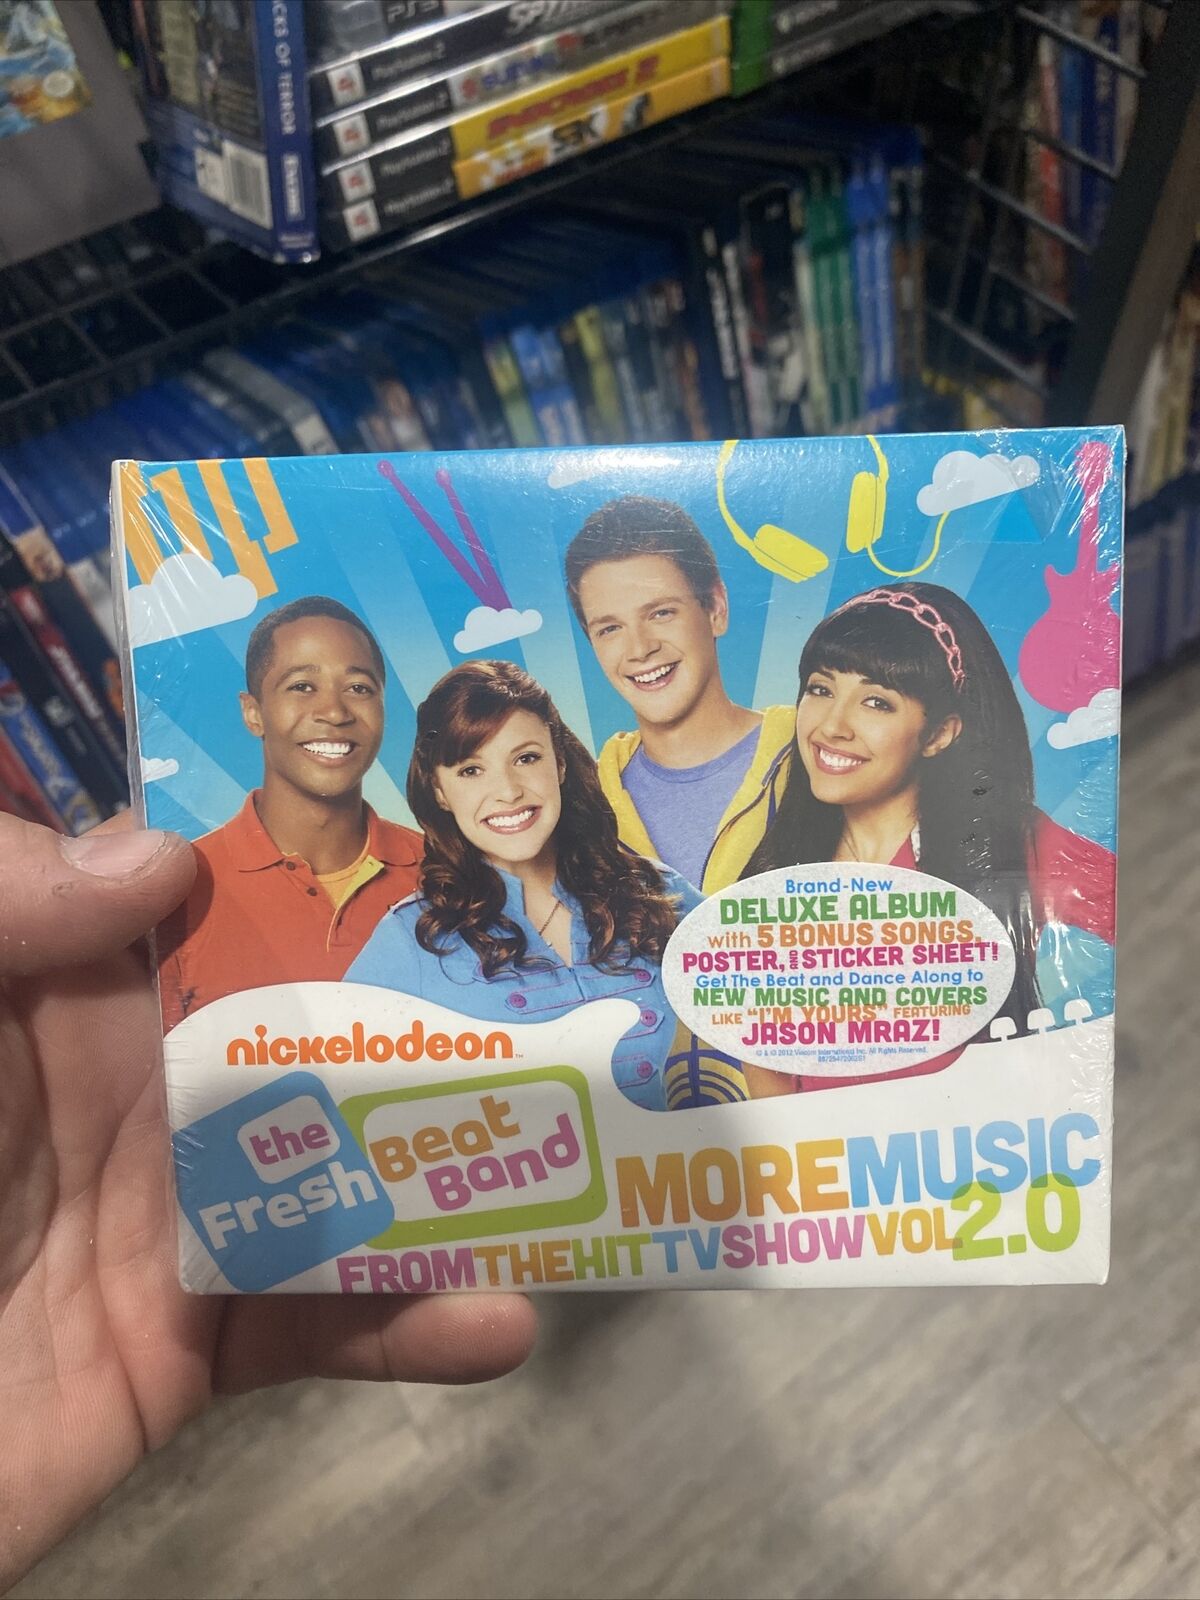 THE FRESH BEAT BAND - THE FRESH BEAT BAND: MORE MUSIC FROM THE HIT TV SHOW, VOL.